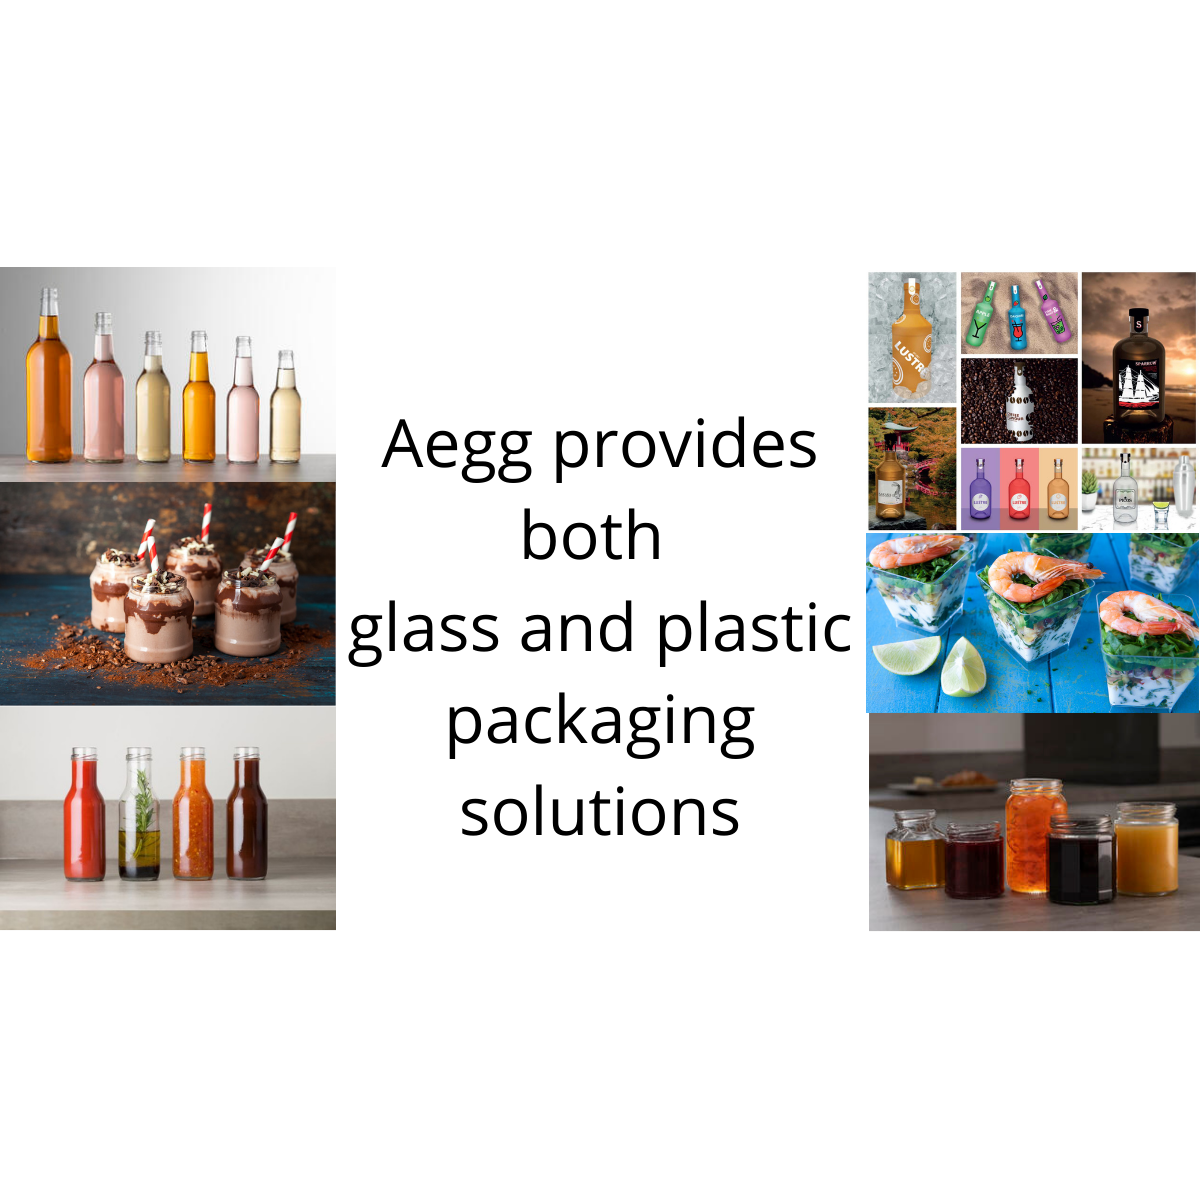 Aegg provides glass and plastic packaging